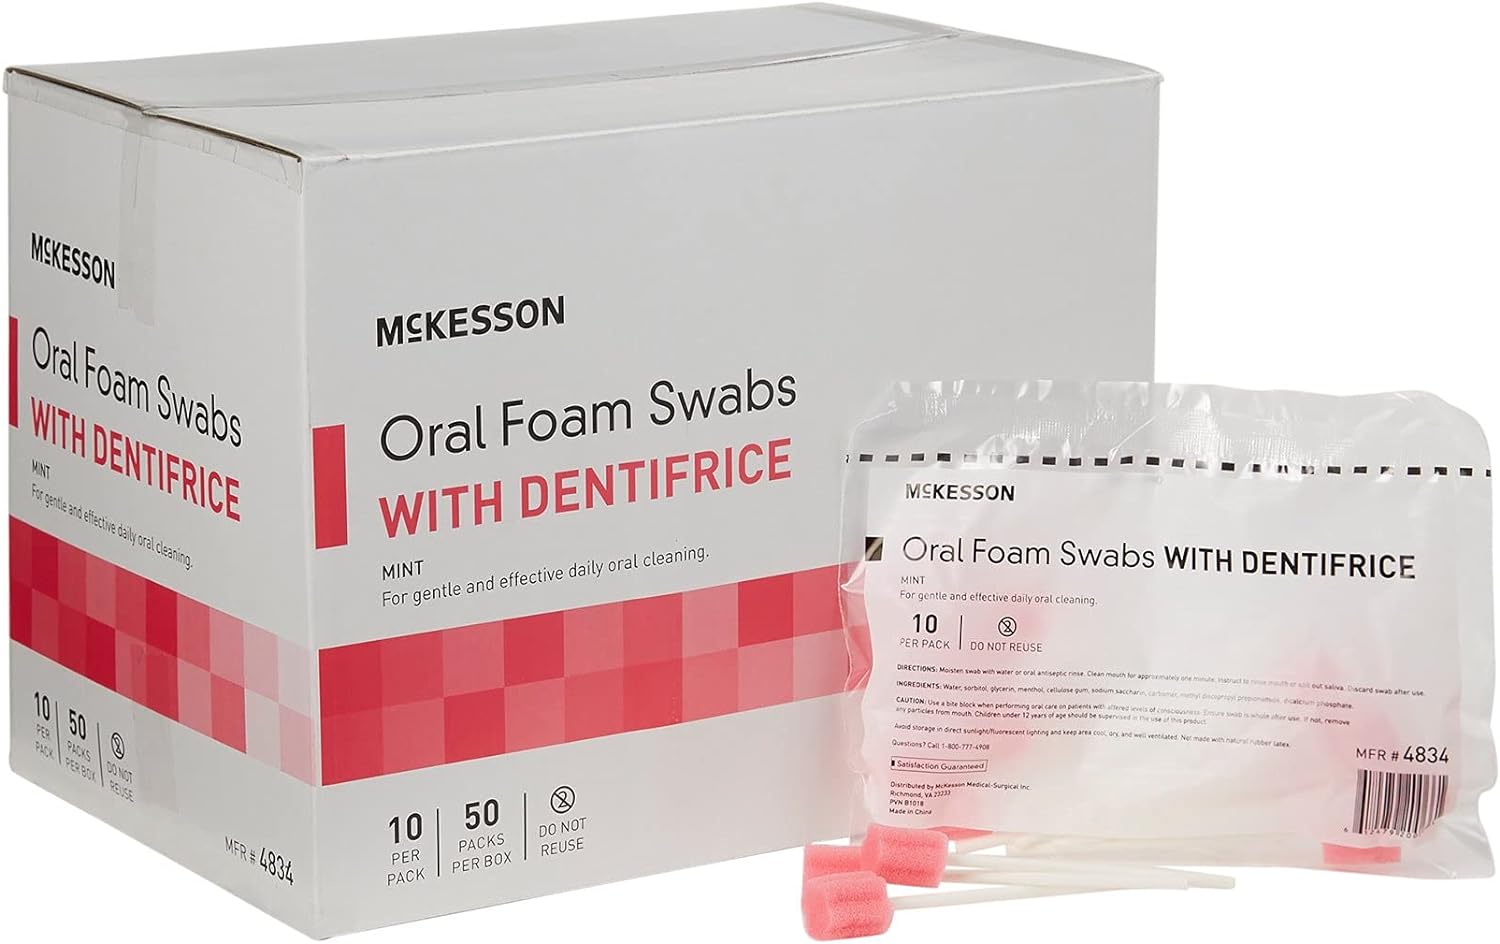 McKesson Oral Foam Swabs with Dentifrice, Gentle and Daily Oral Cleaning, Mint, 10 Count, 50 Packs, 500 Total